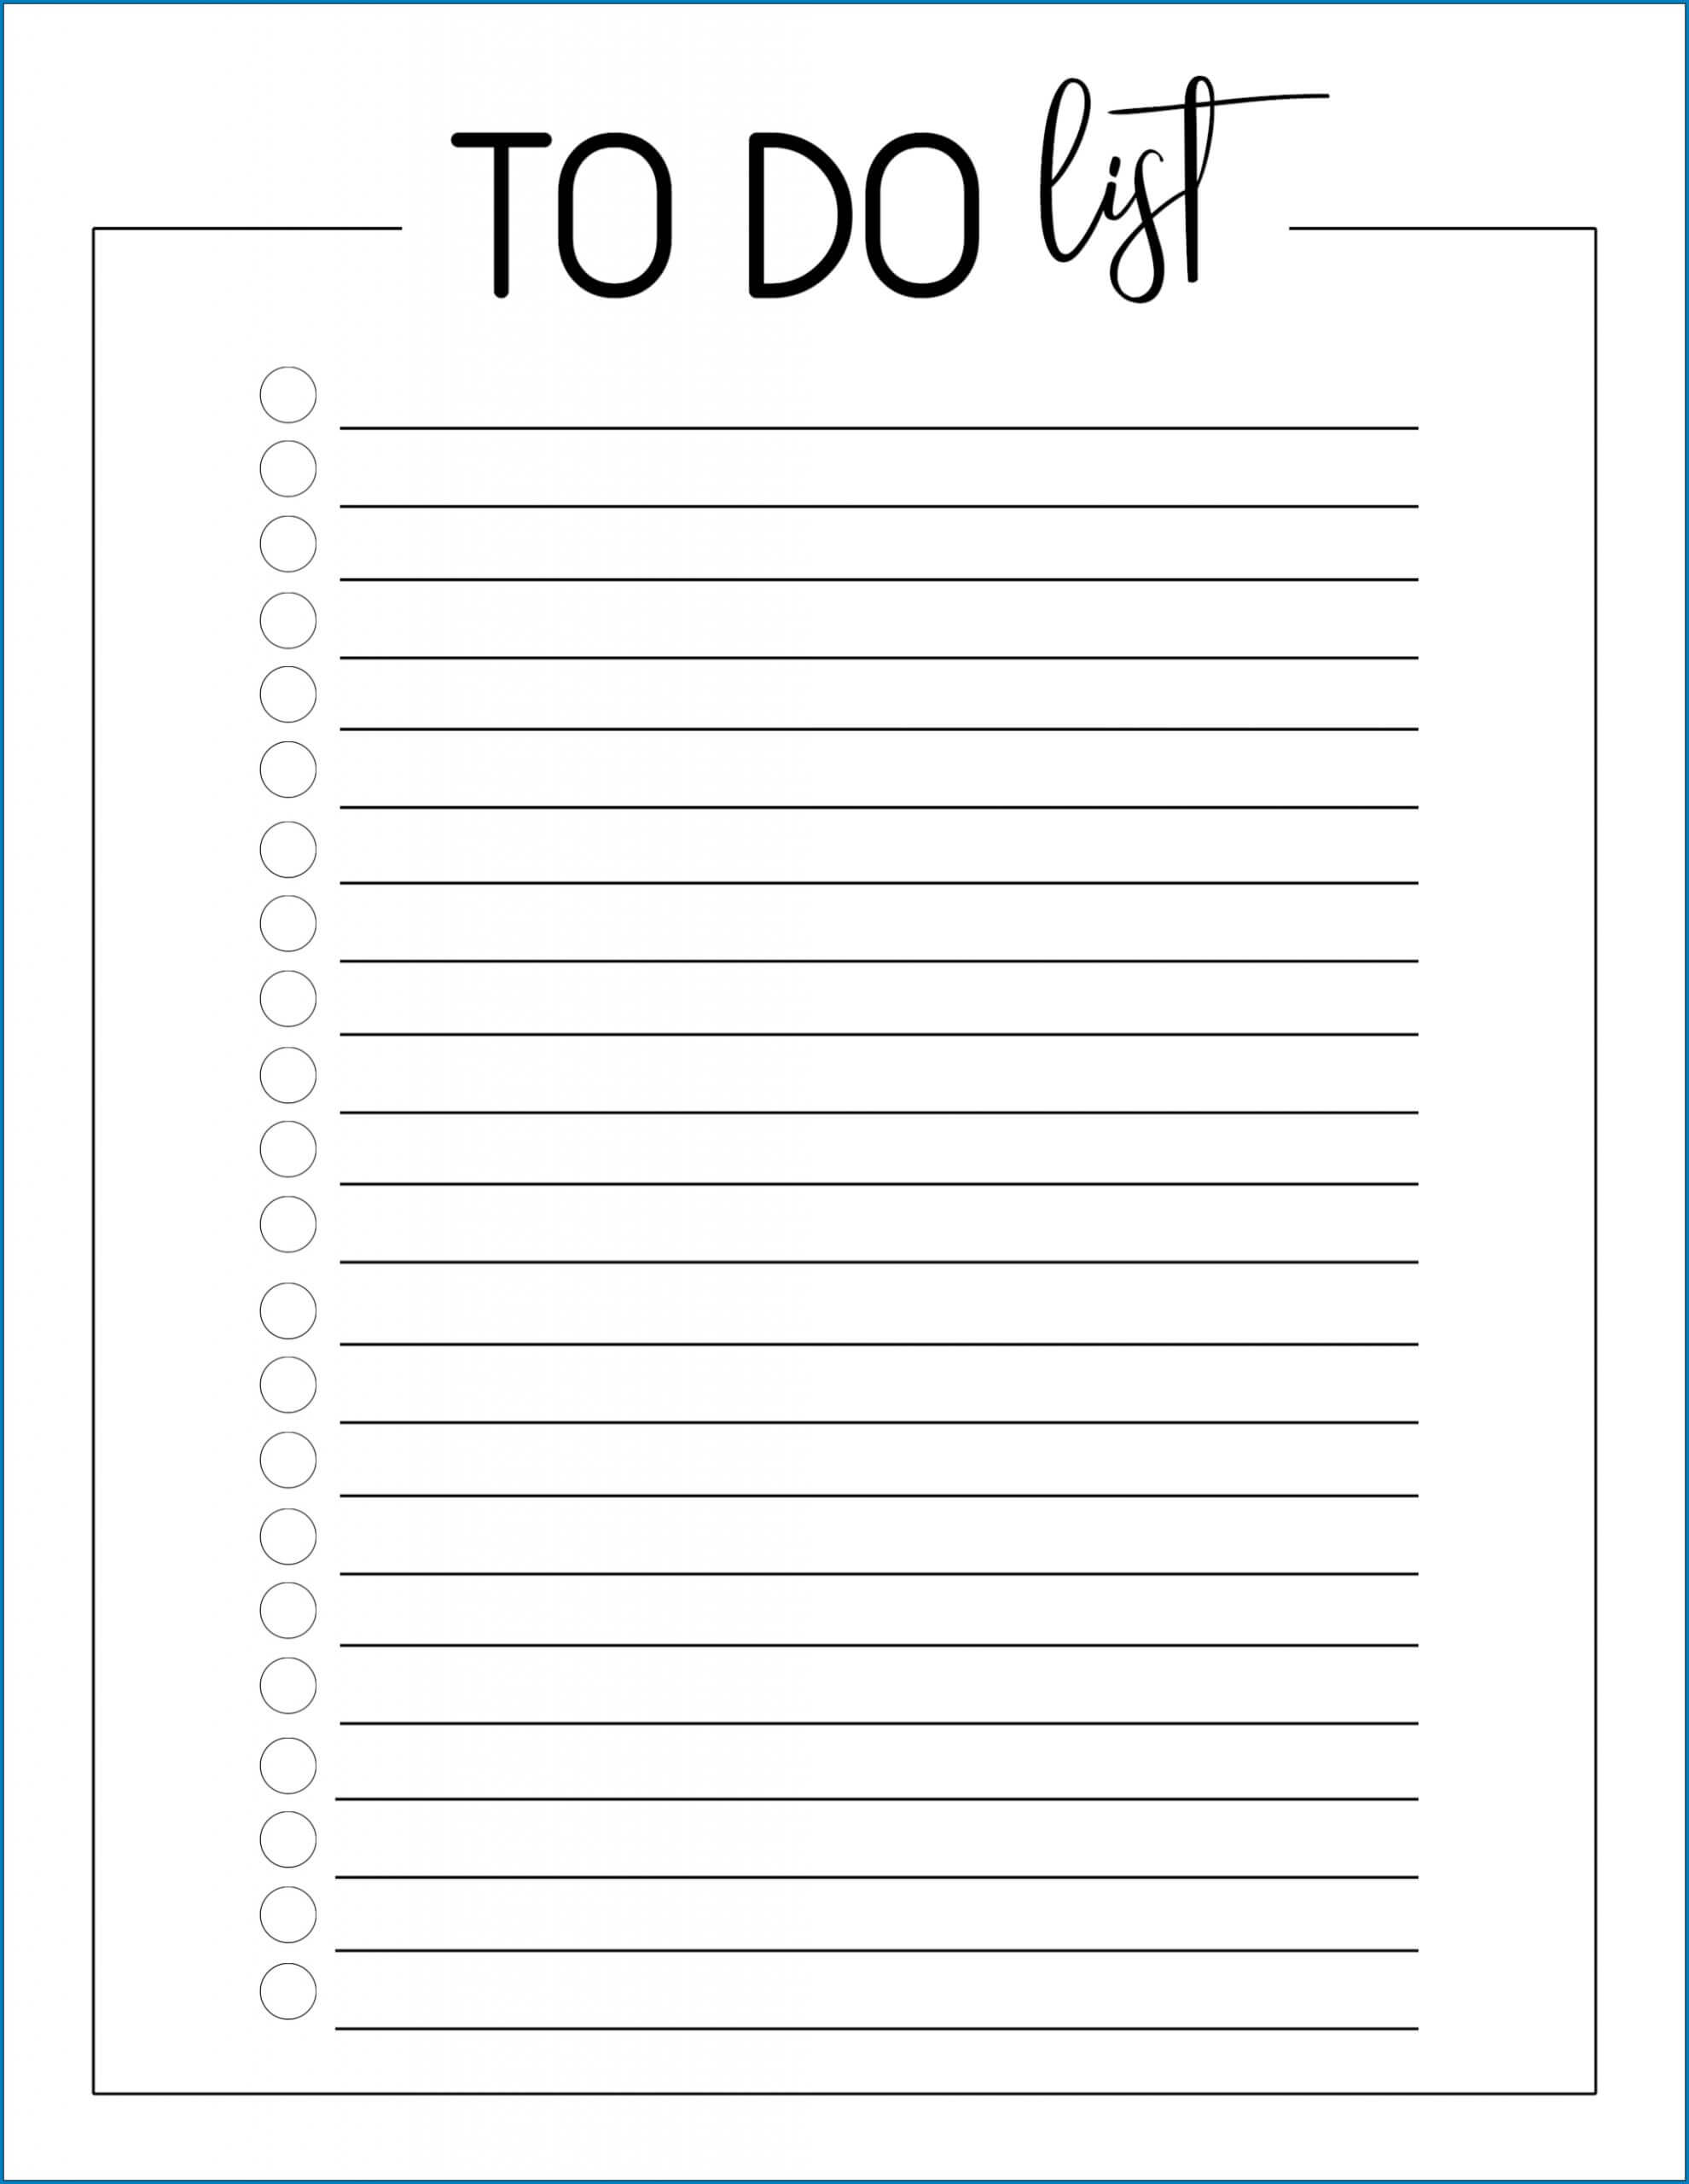 √ Free To Do List Printable Template | Templateral In Blank To Do List Template